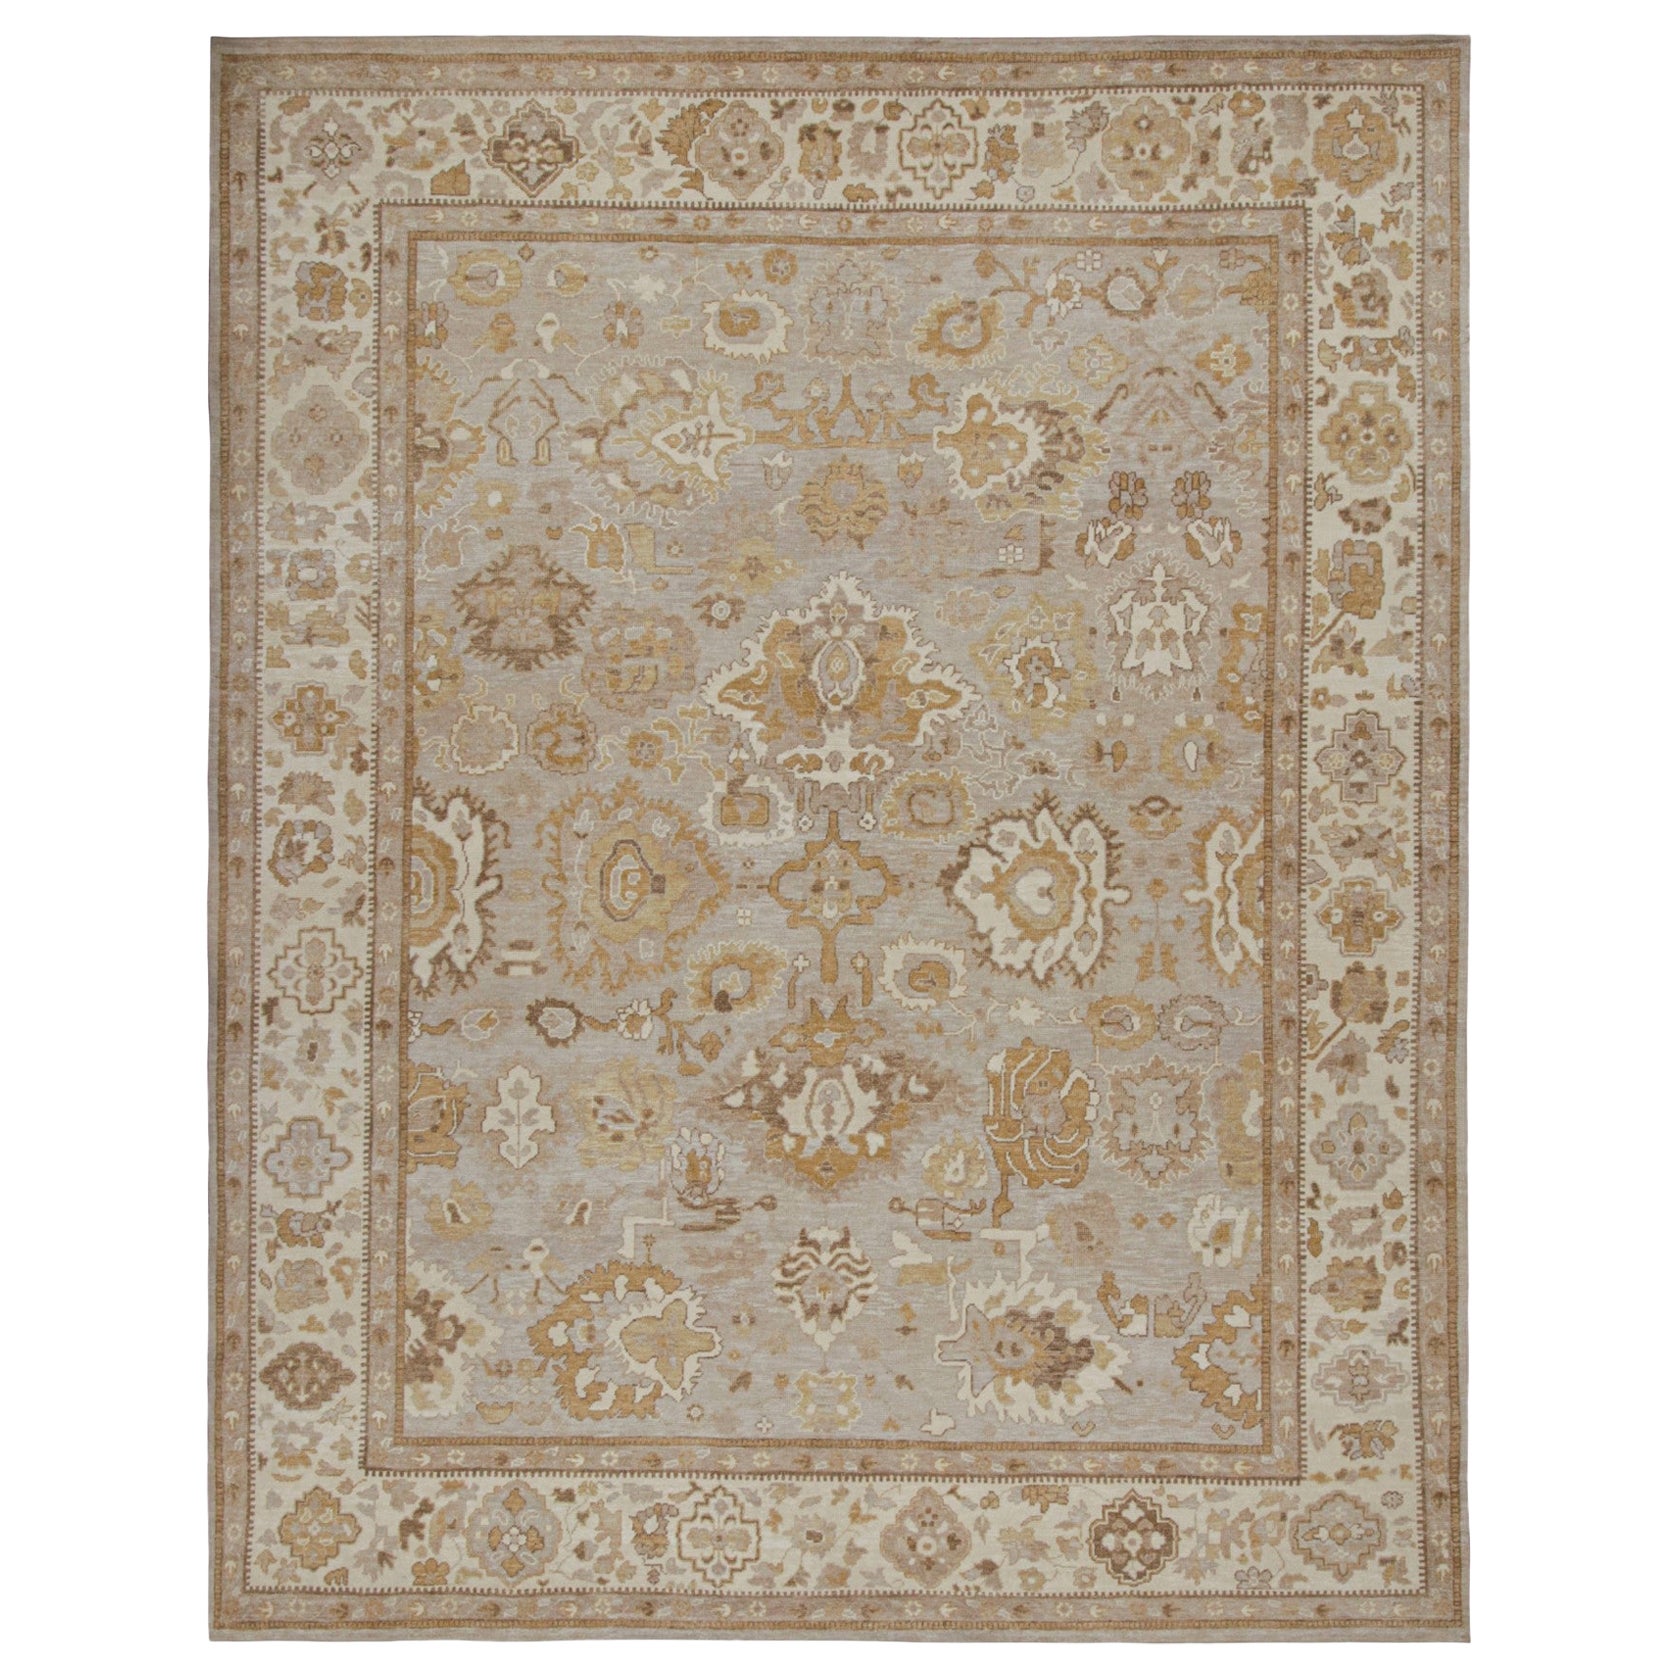 Rug & Kilim’s Oushak Style Rug in Beige-Brown & Gold Floral Pattern For Sale